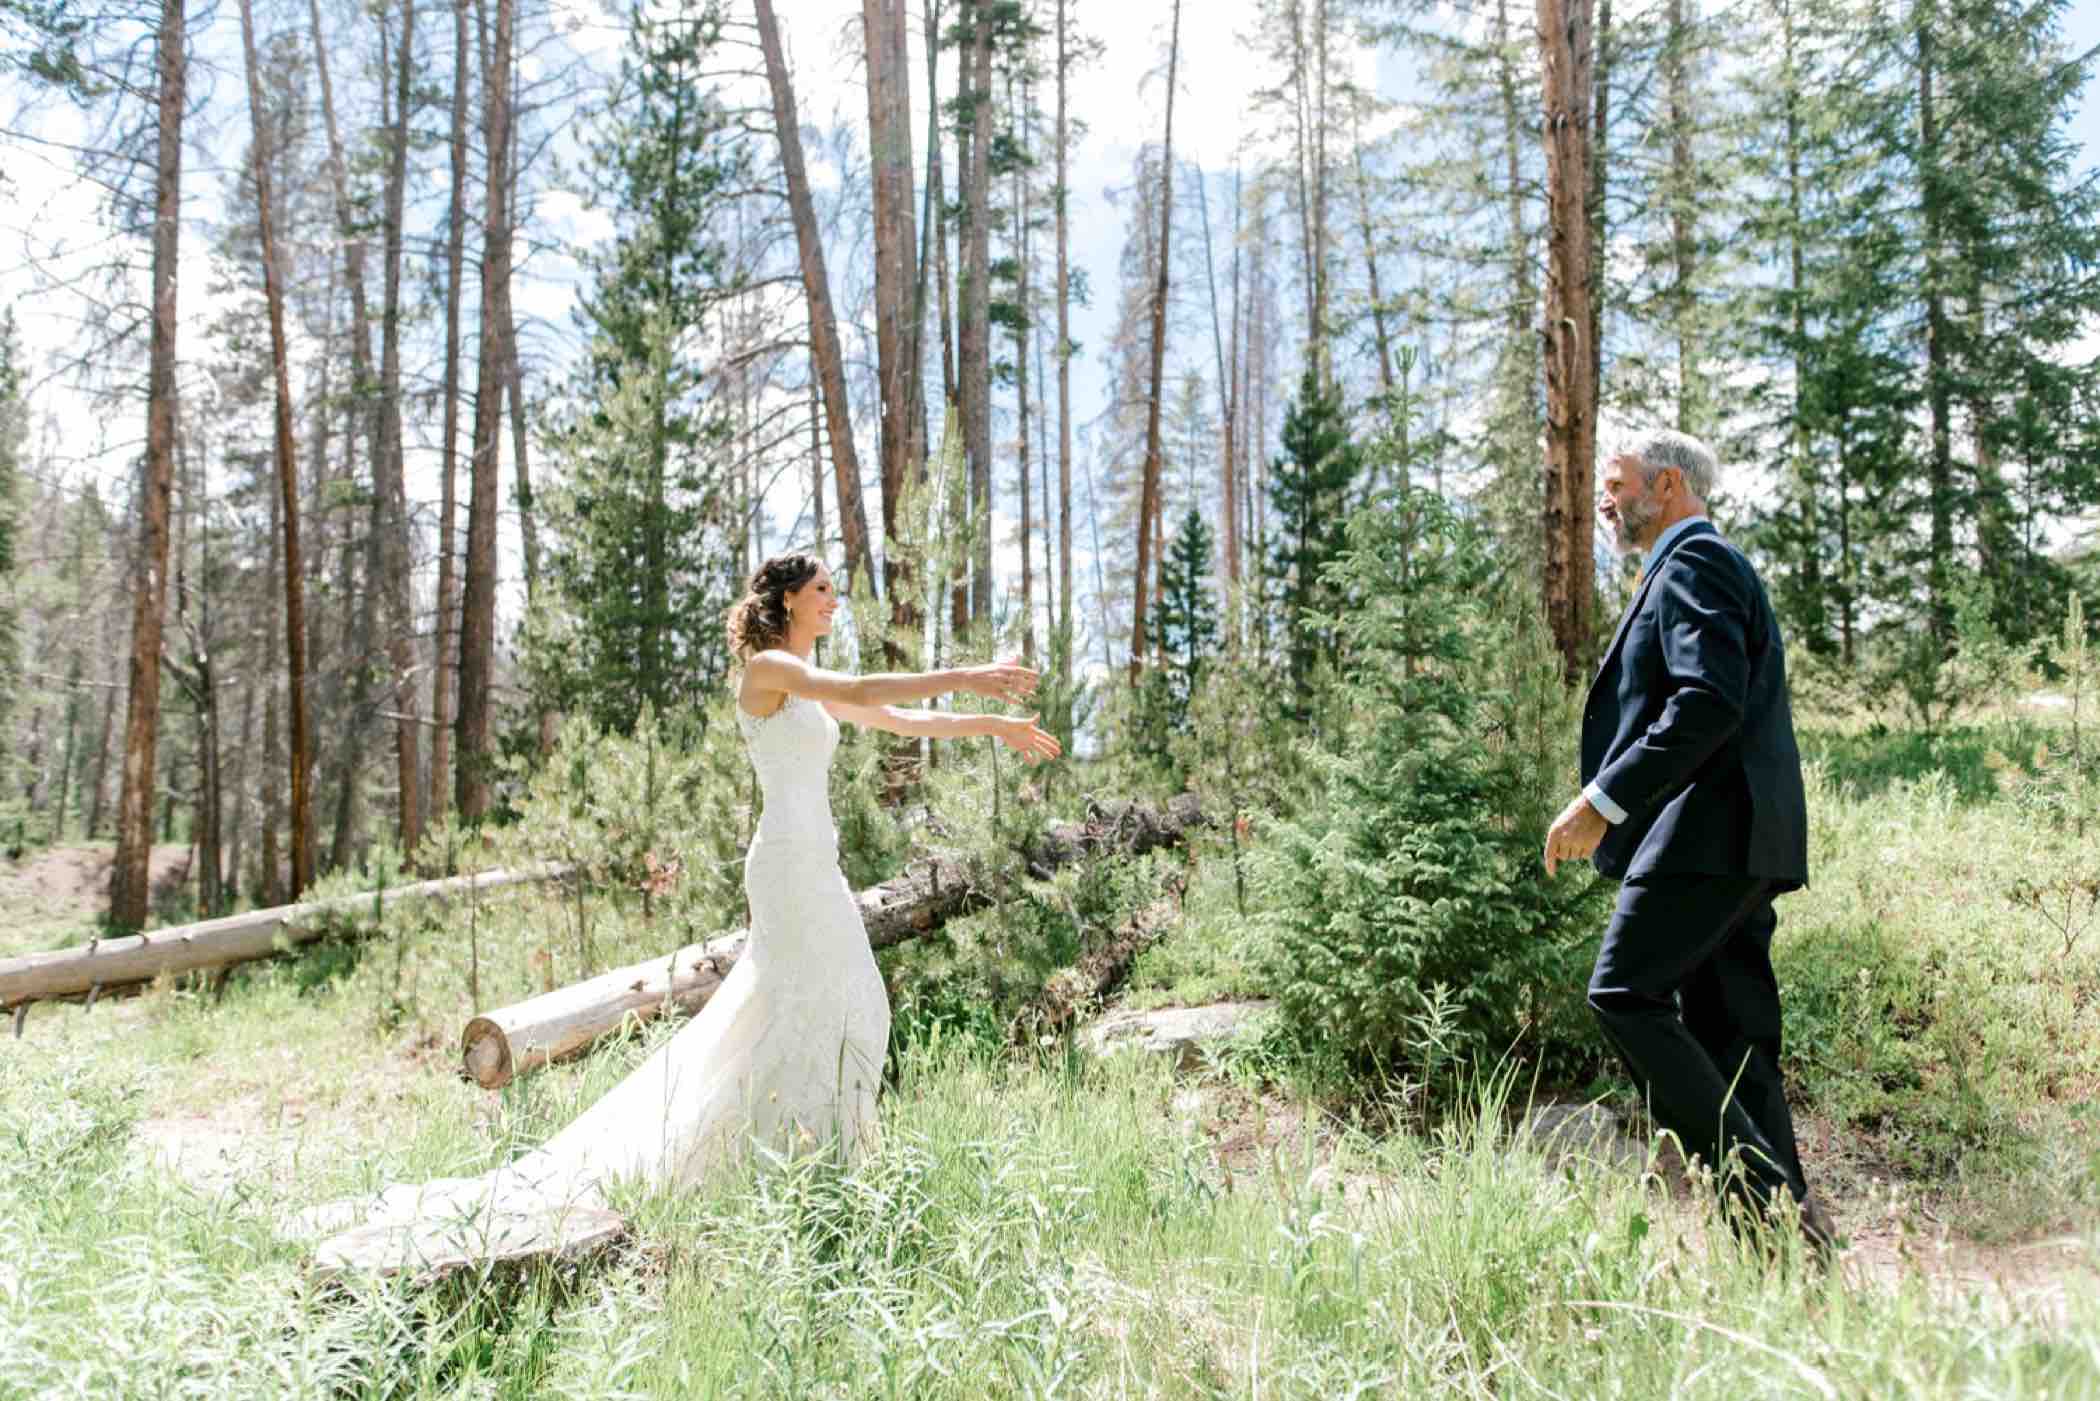 Bride sees her father for the first time before her wedding at Piney River Ranch in Vail, Colorado. Photo by Ali and Garrett, Romantic, Adventurous, Nostalgic Wedding Photographers.